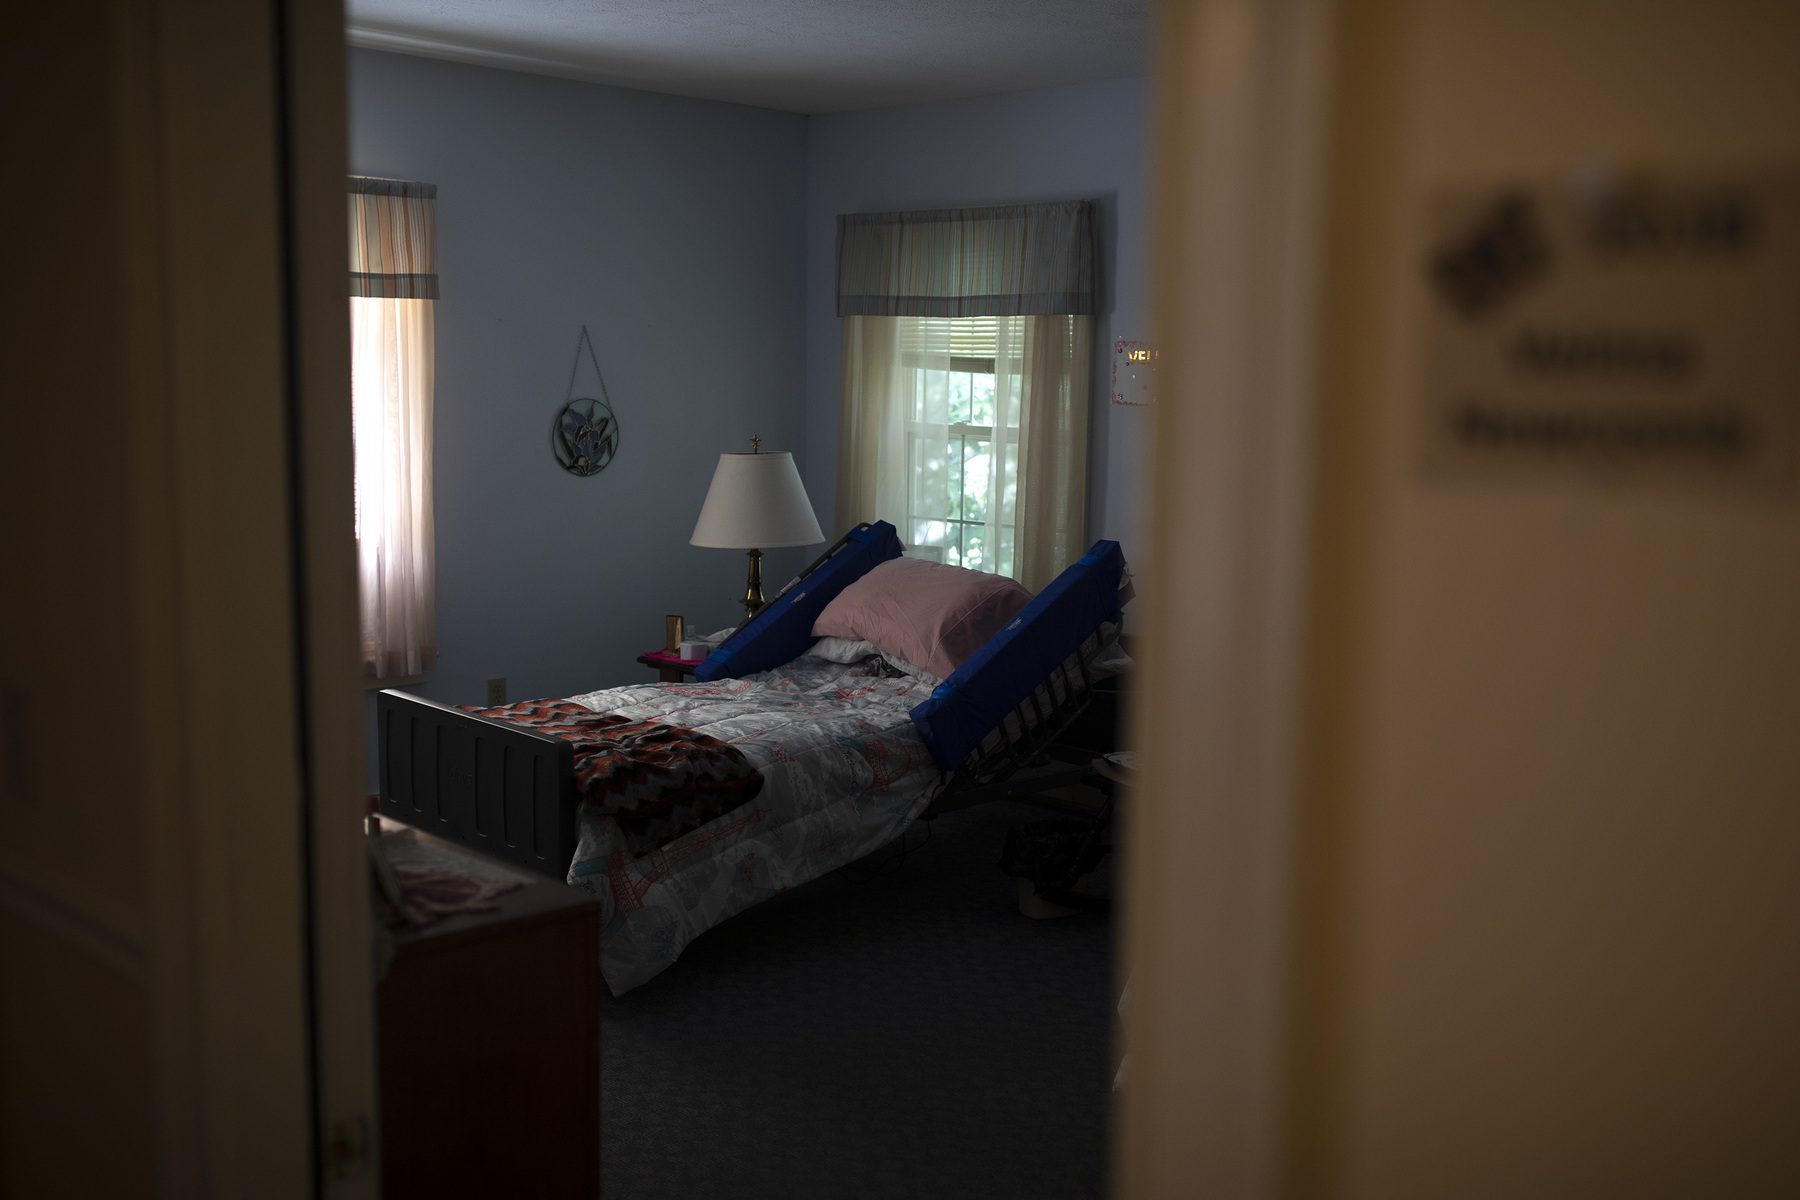 A room shows a bed in a nursing home.